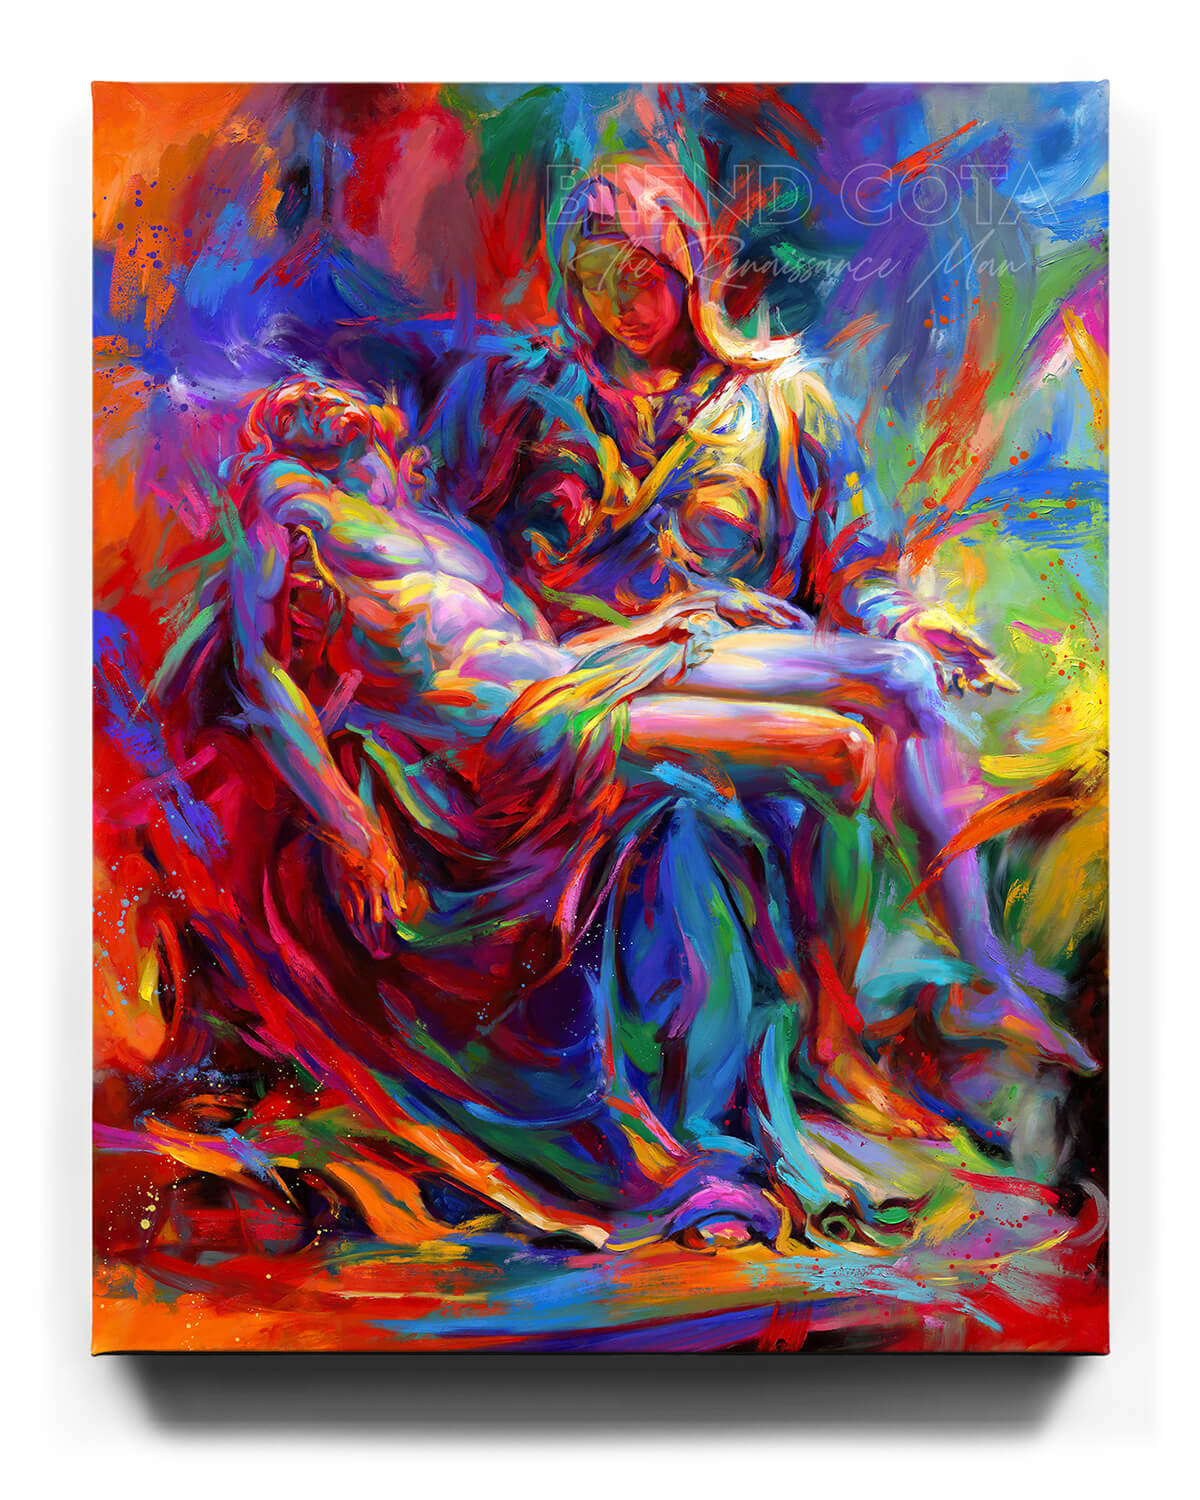 THE COLORS OF PIETA Oil On Canvas By Blend Cota